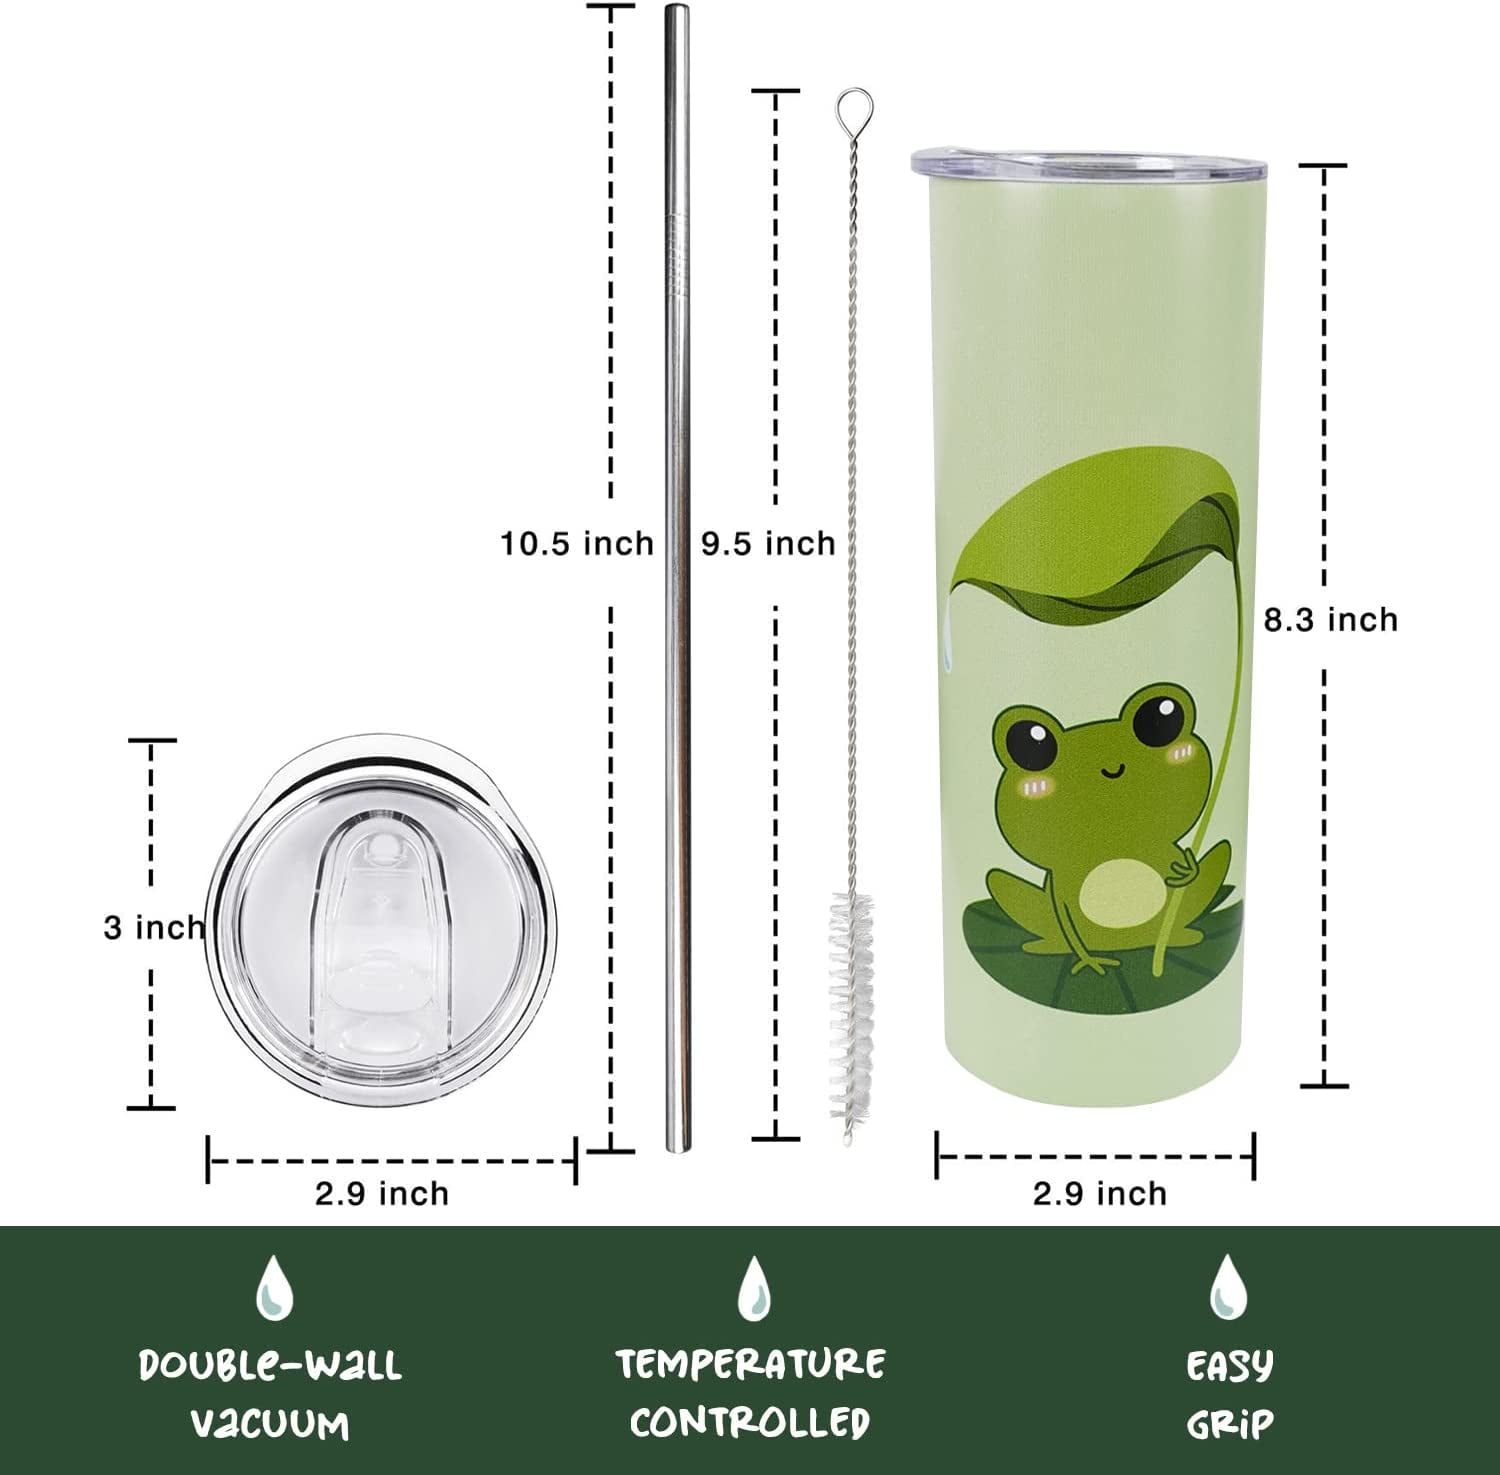 Indulge in Freshness with Sandjest's Avocado Skinny Tumbler Collection